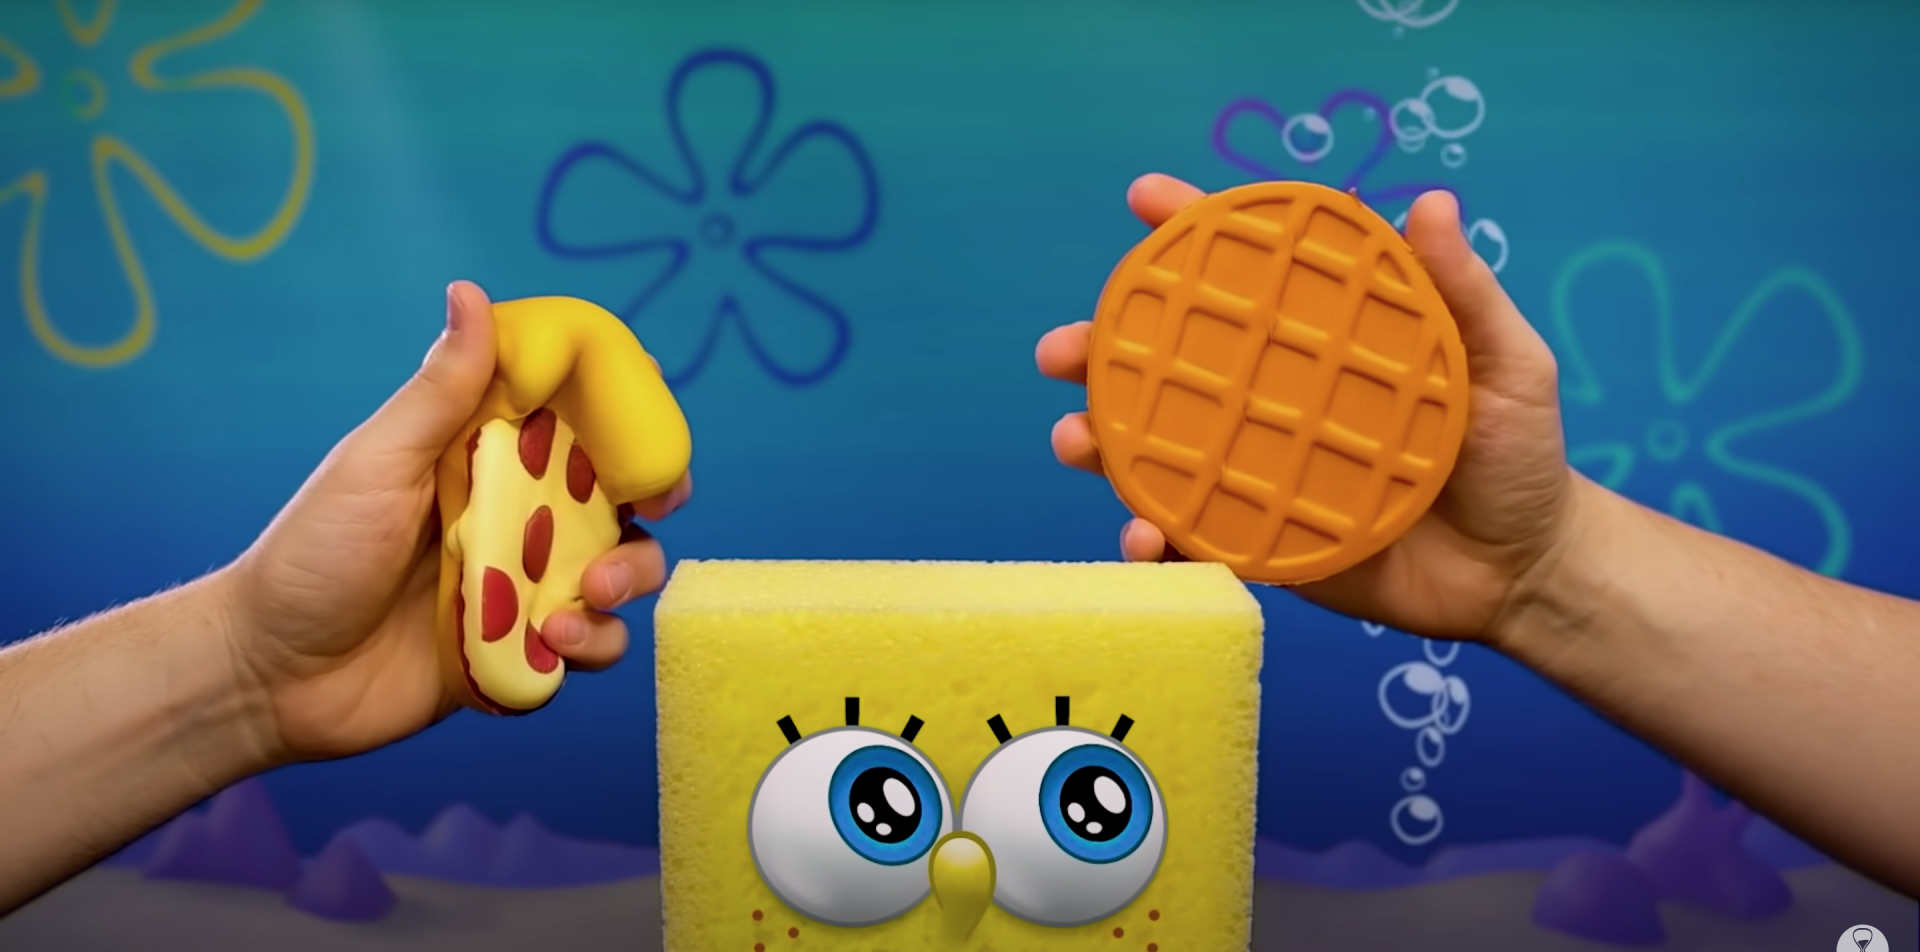 An animated SpongeBob SquarePants surrounded by two human arms and hands with each one squeezing a rubber toy.